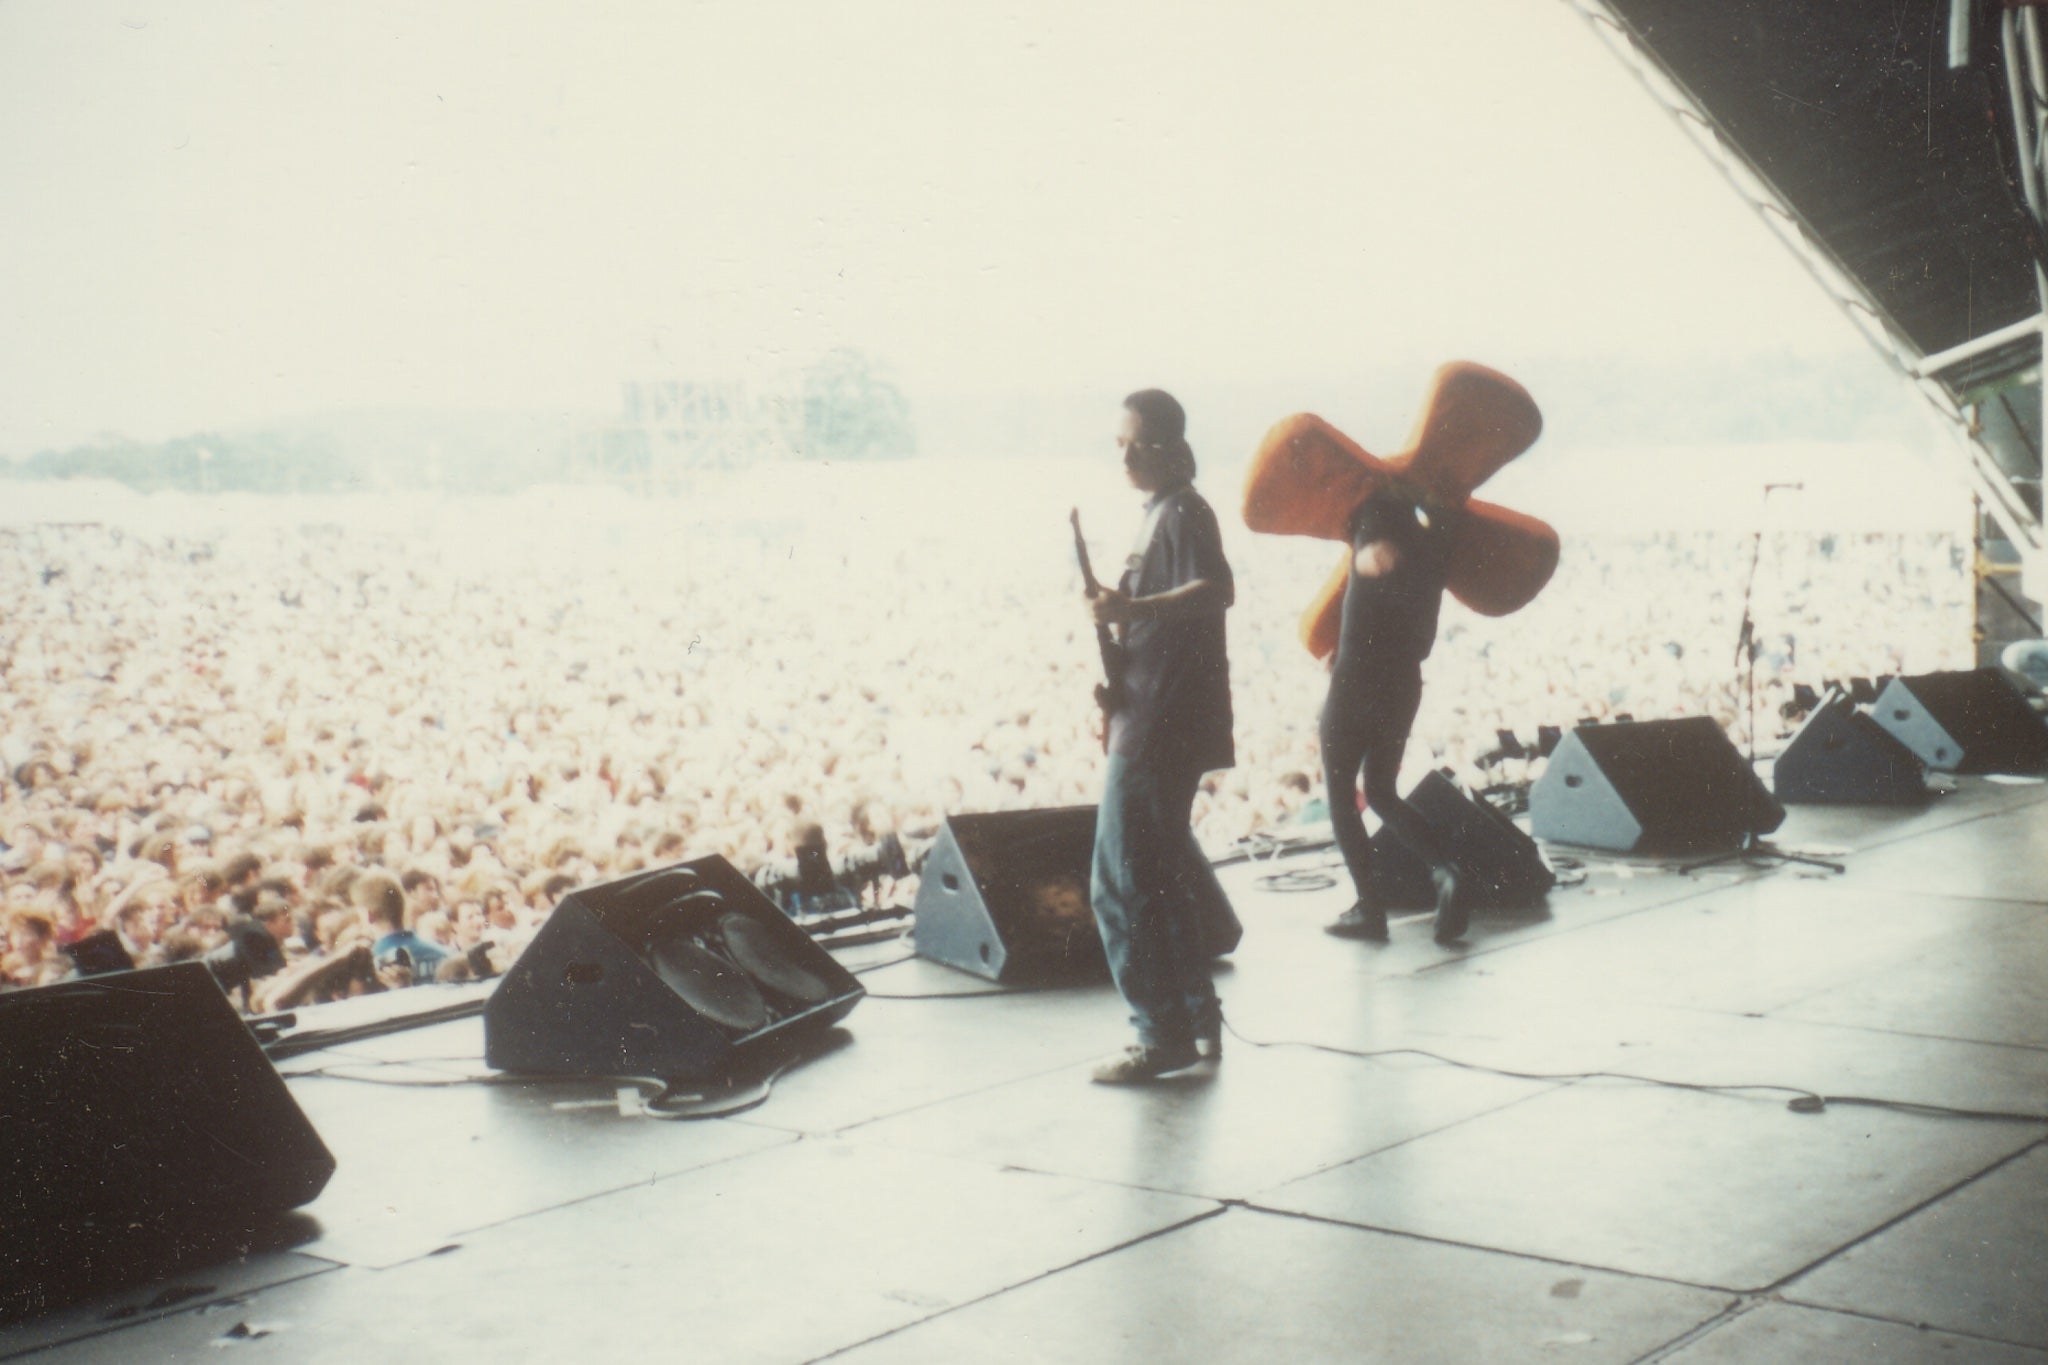 Flowered Up perform at Reading Festival on 24 August 1991